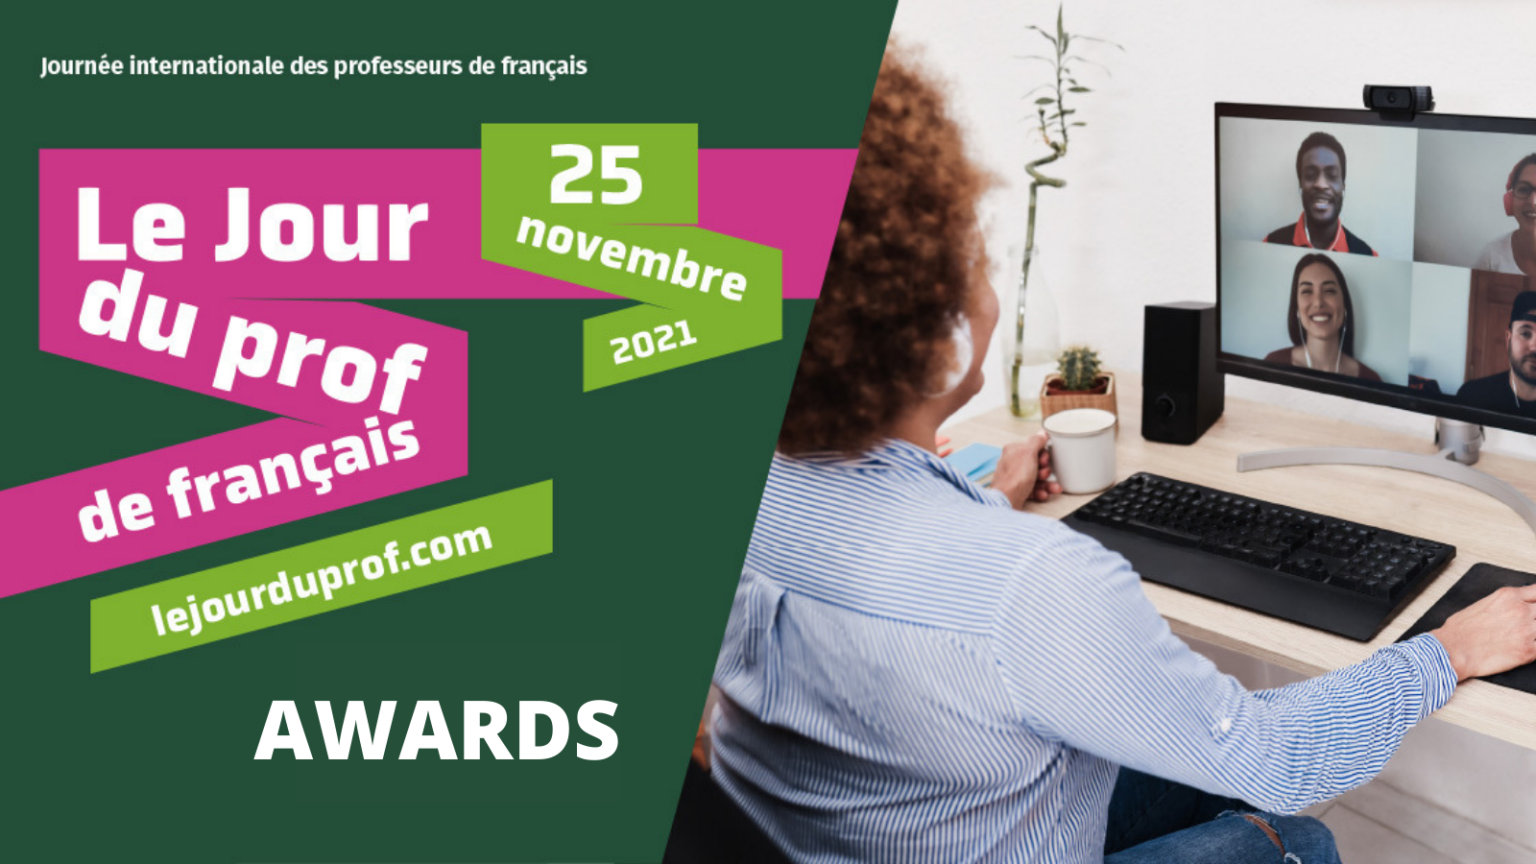 Exceptional French Language Teacher Award 2021, Online Event